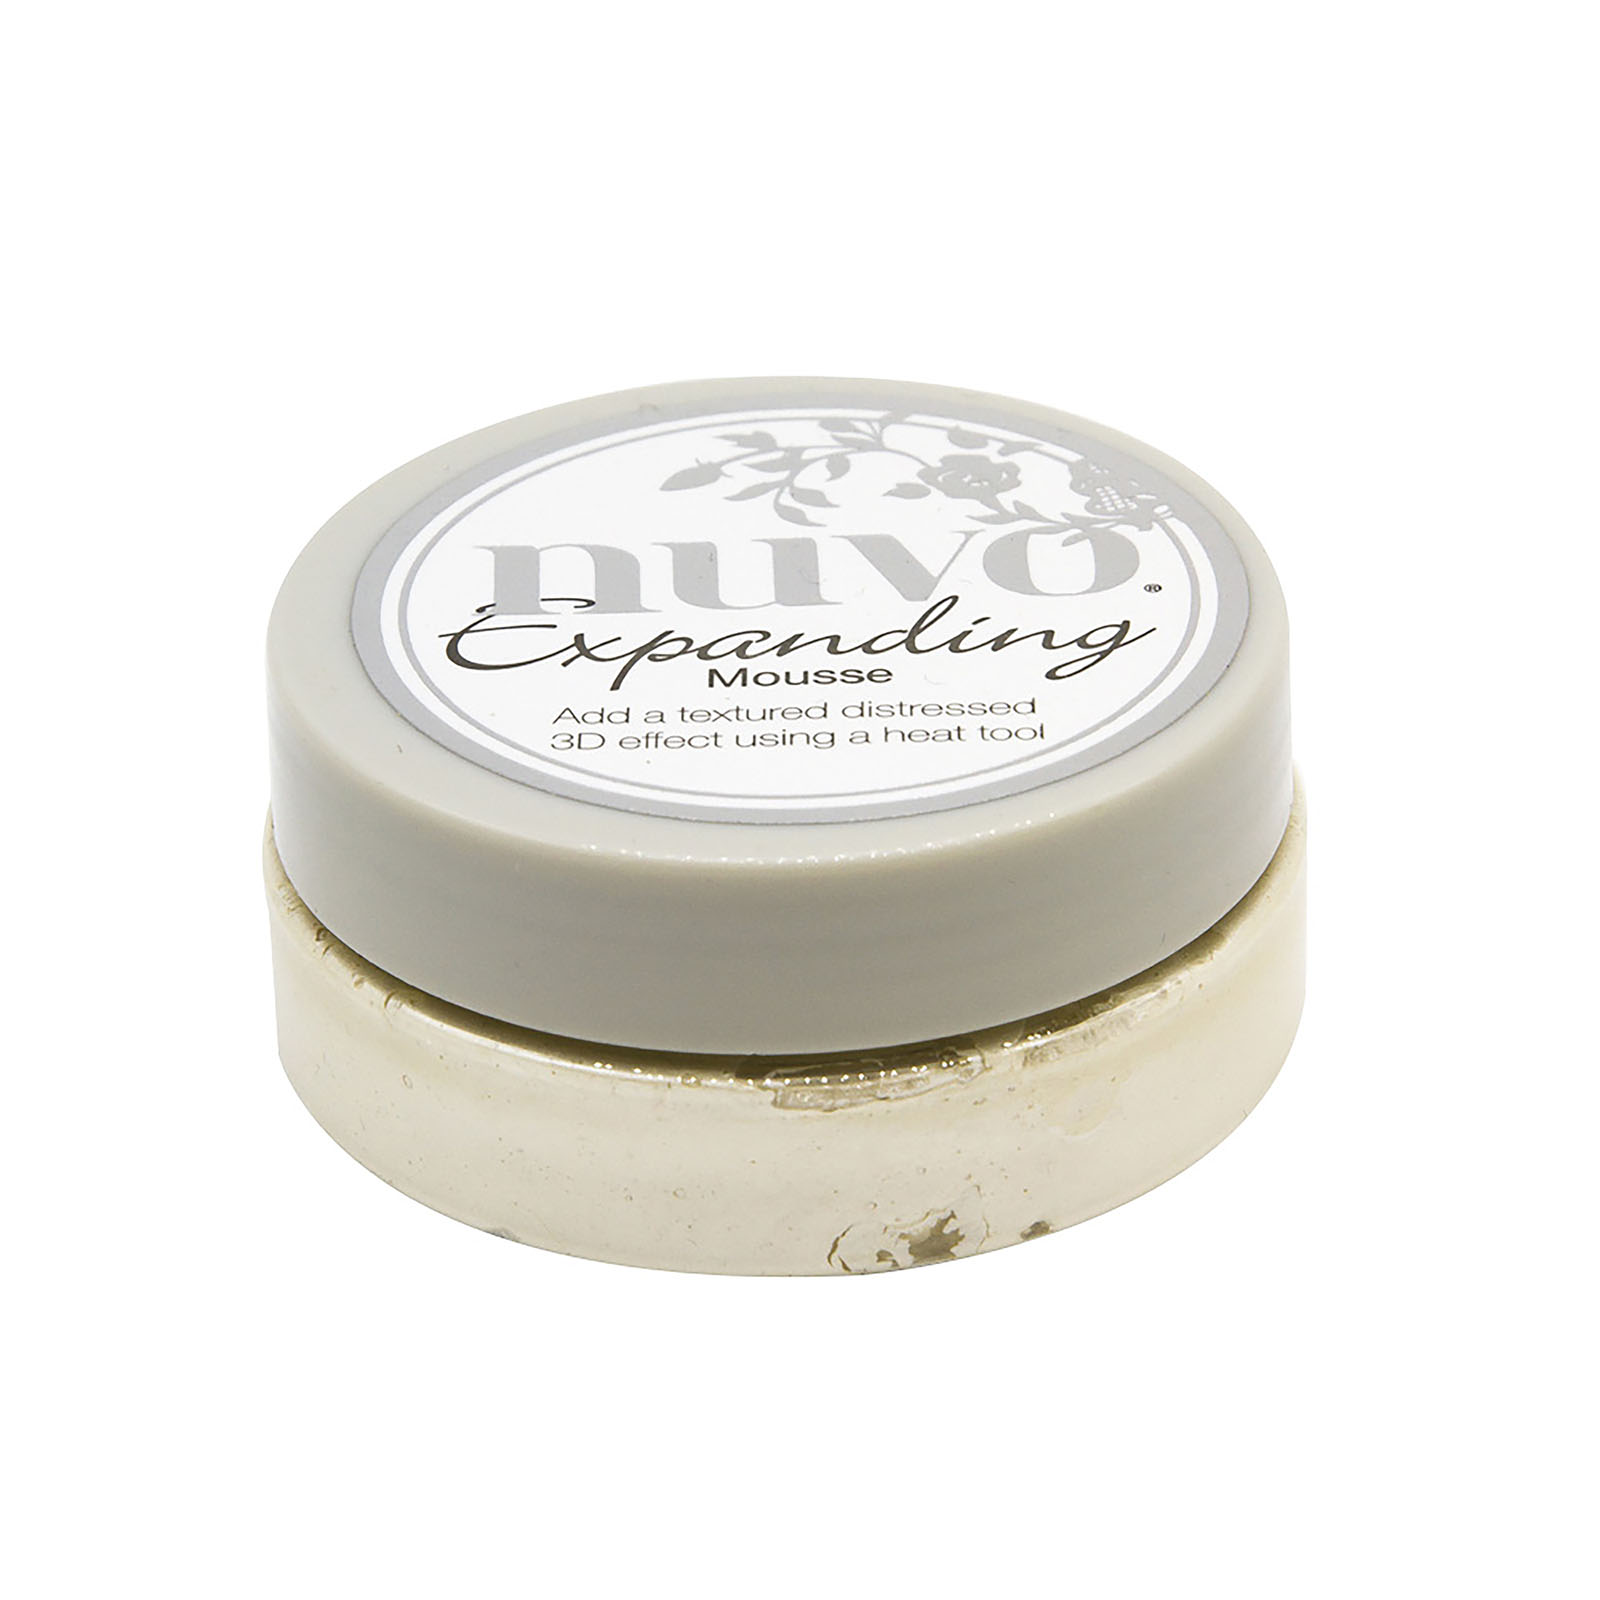 Nuvo • Rustic rose expanding mousse Natural cotton